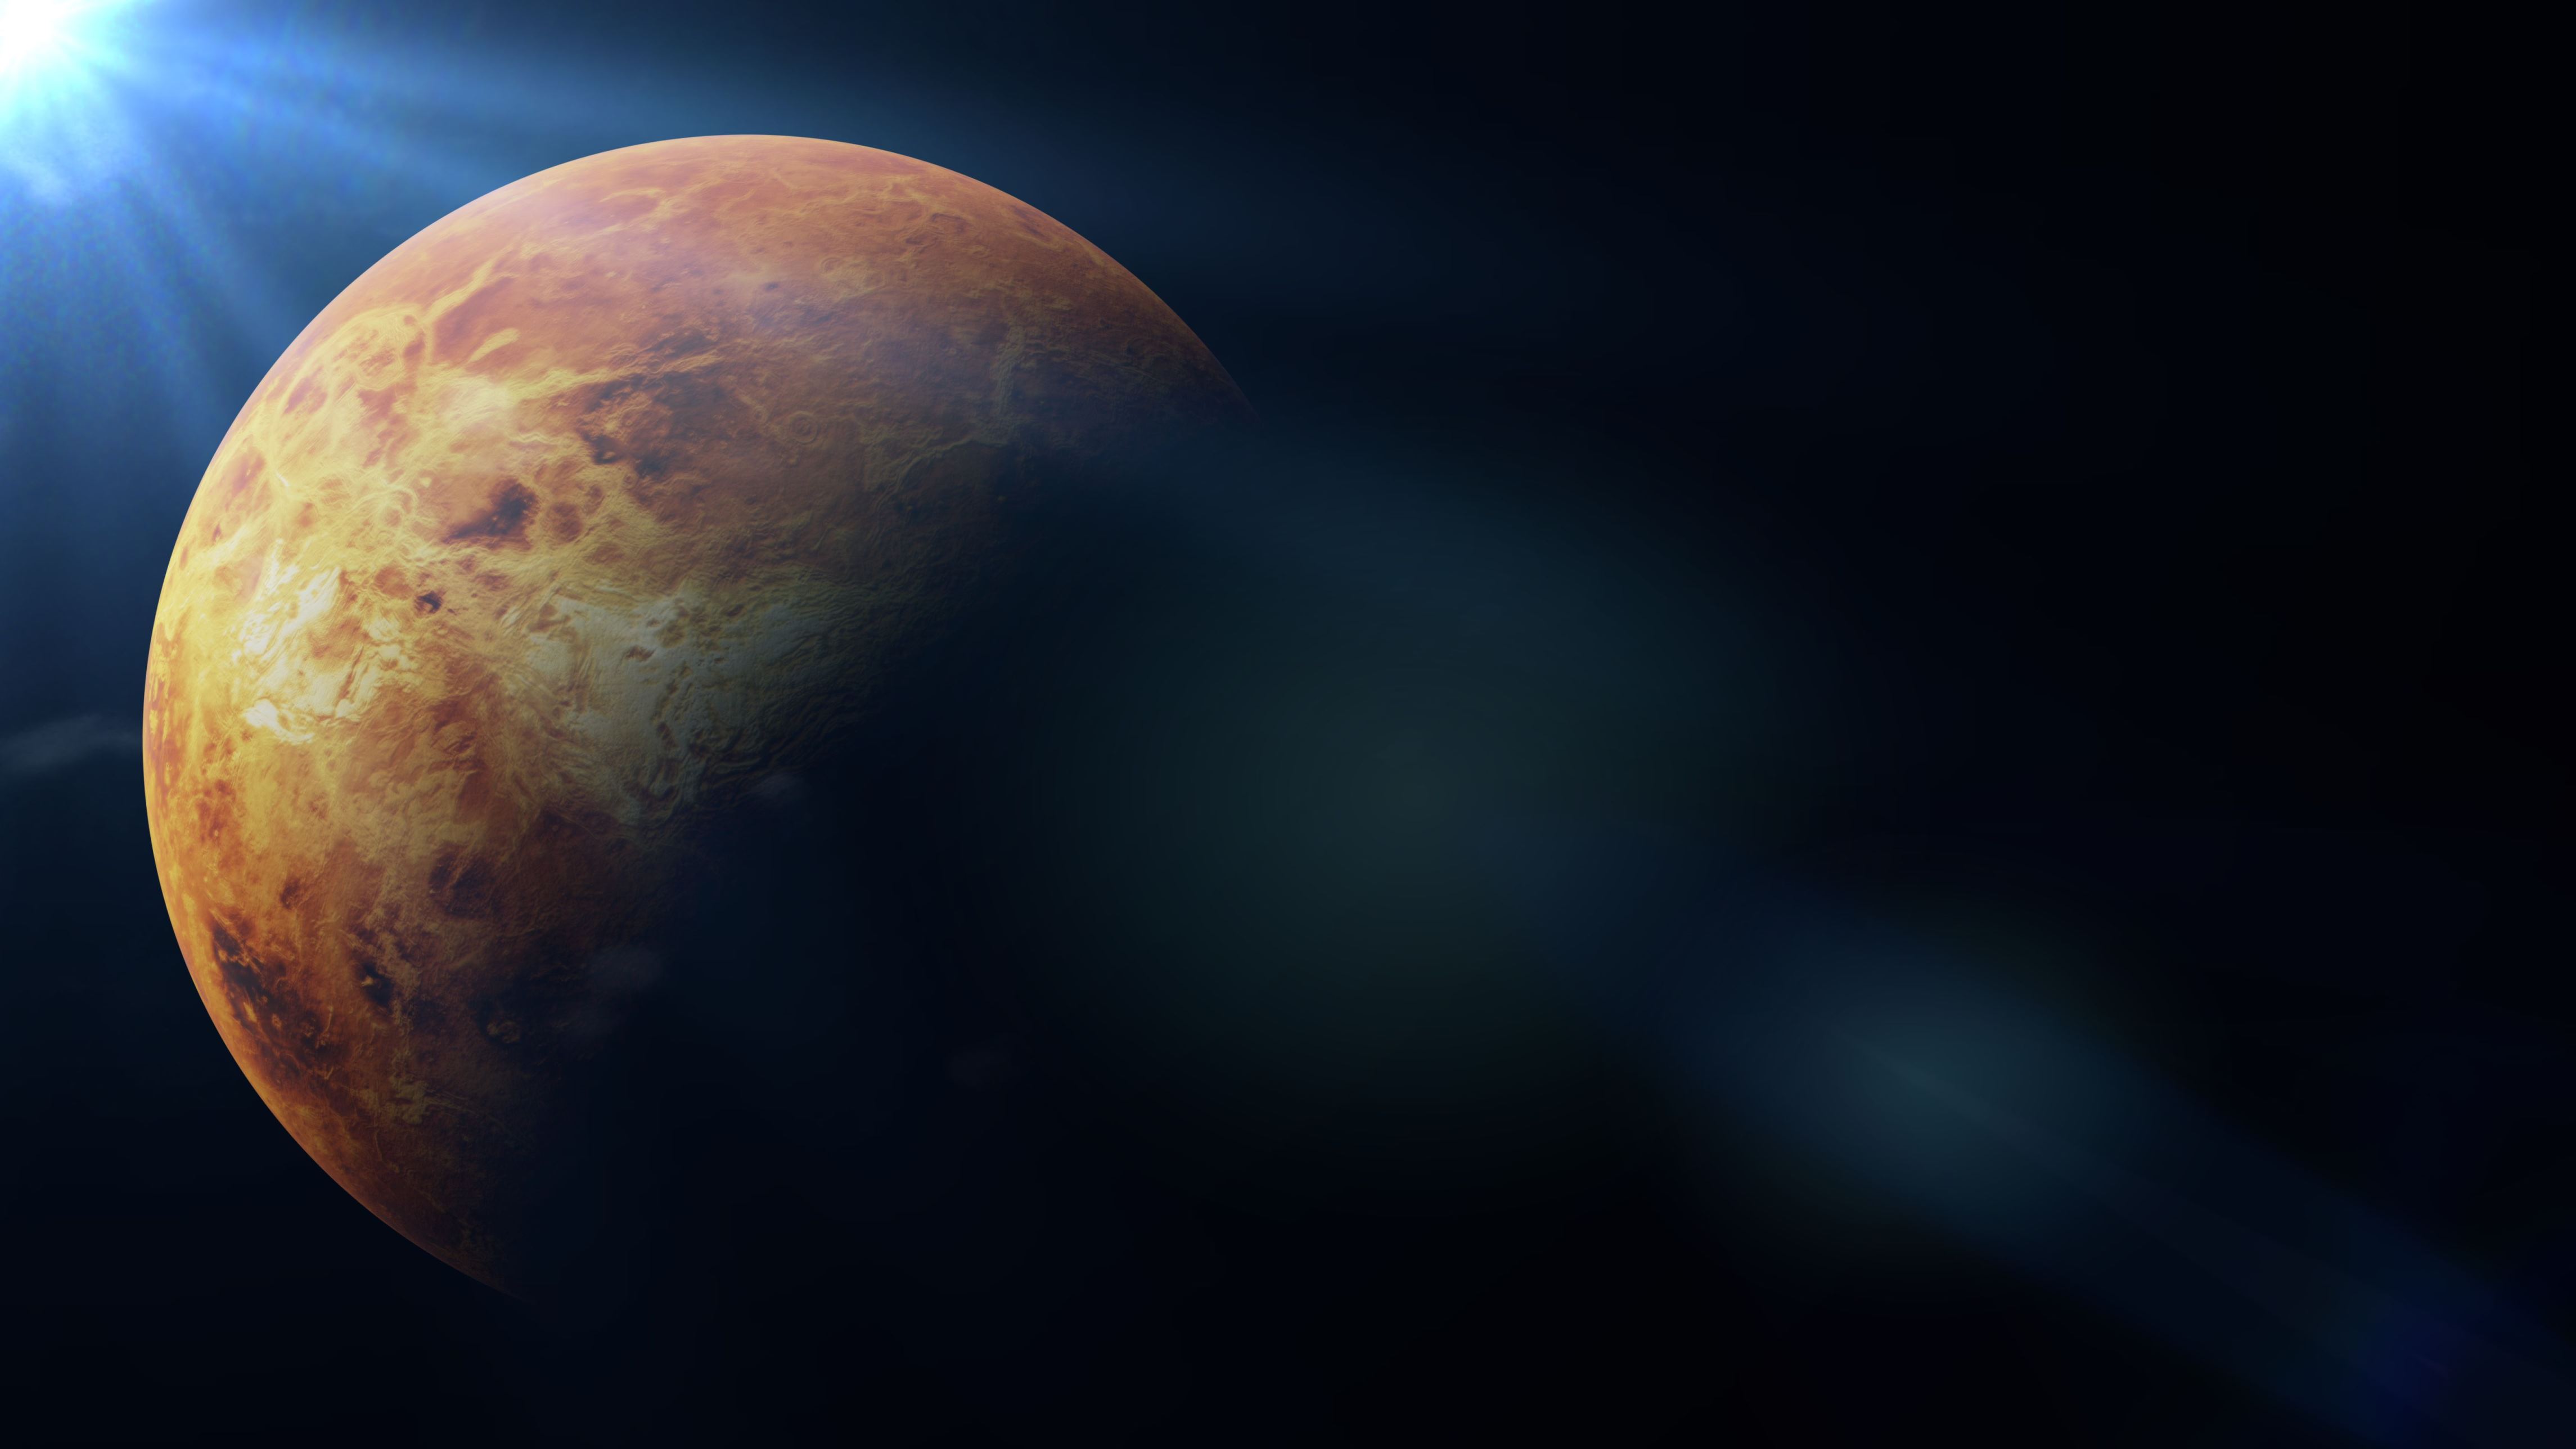 <p class="MsoNormal">Venus may be the hottest planet in the solar system, and it may be the planet with the most volcanoes, but for reasons that scientists have been unable to determine, <a href="https://www.universetoday.com/33415/interesting-facts-about-the-planets/">it has no moons</a>. Not even one! There is, however, research to suggest that it might have had one long ago.</p>